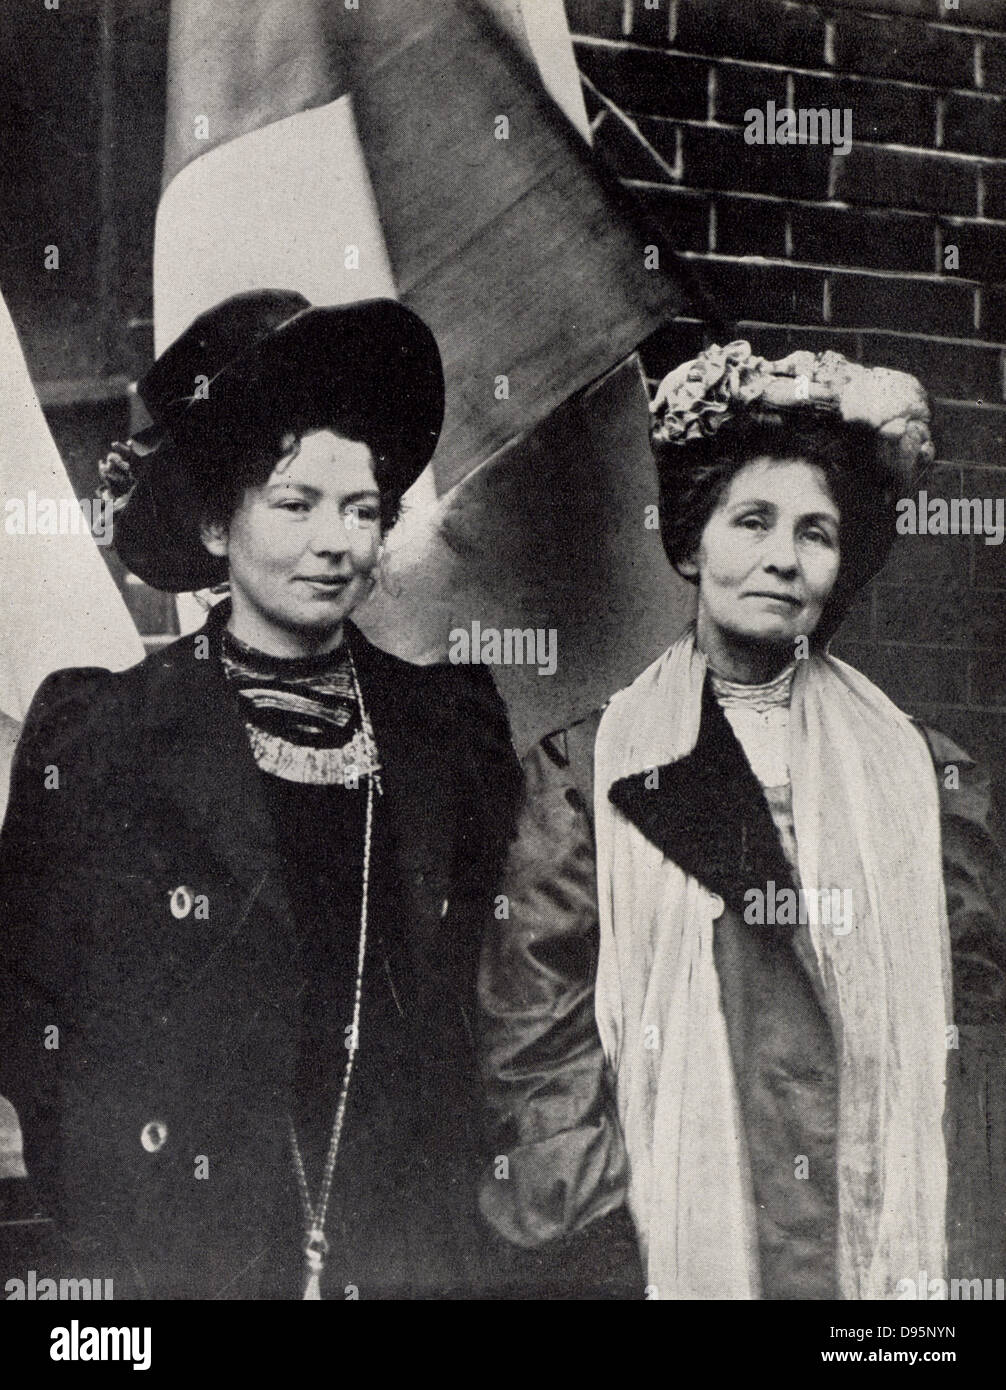 Emmeline Pankhurst (1857-1928) English suffragette, founder of Women's Franchise League (1889) and, in 1903 with her daughter Christabel (1880-1958) pictured with her, founder of the Women's Social and Political Union. Stock Photo